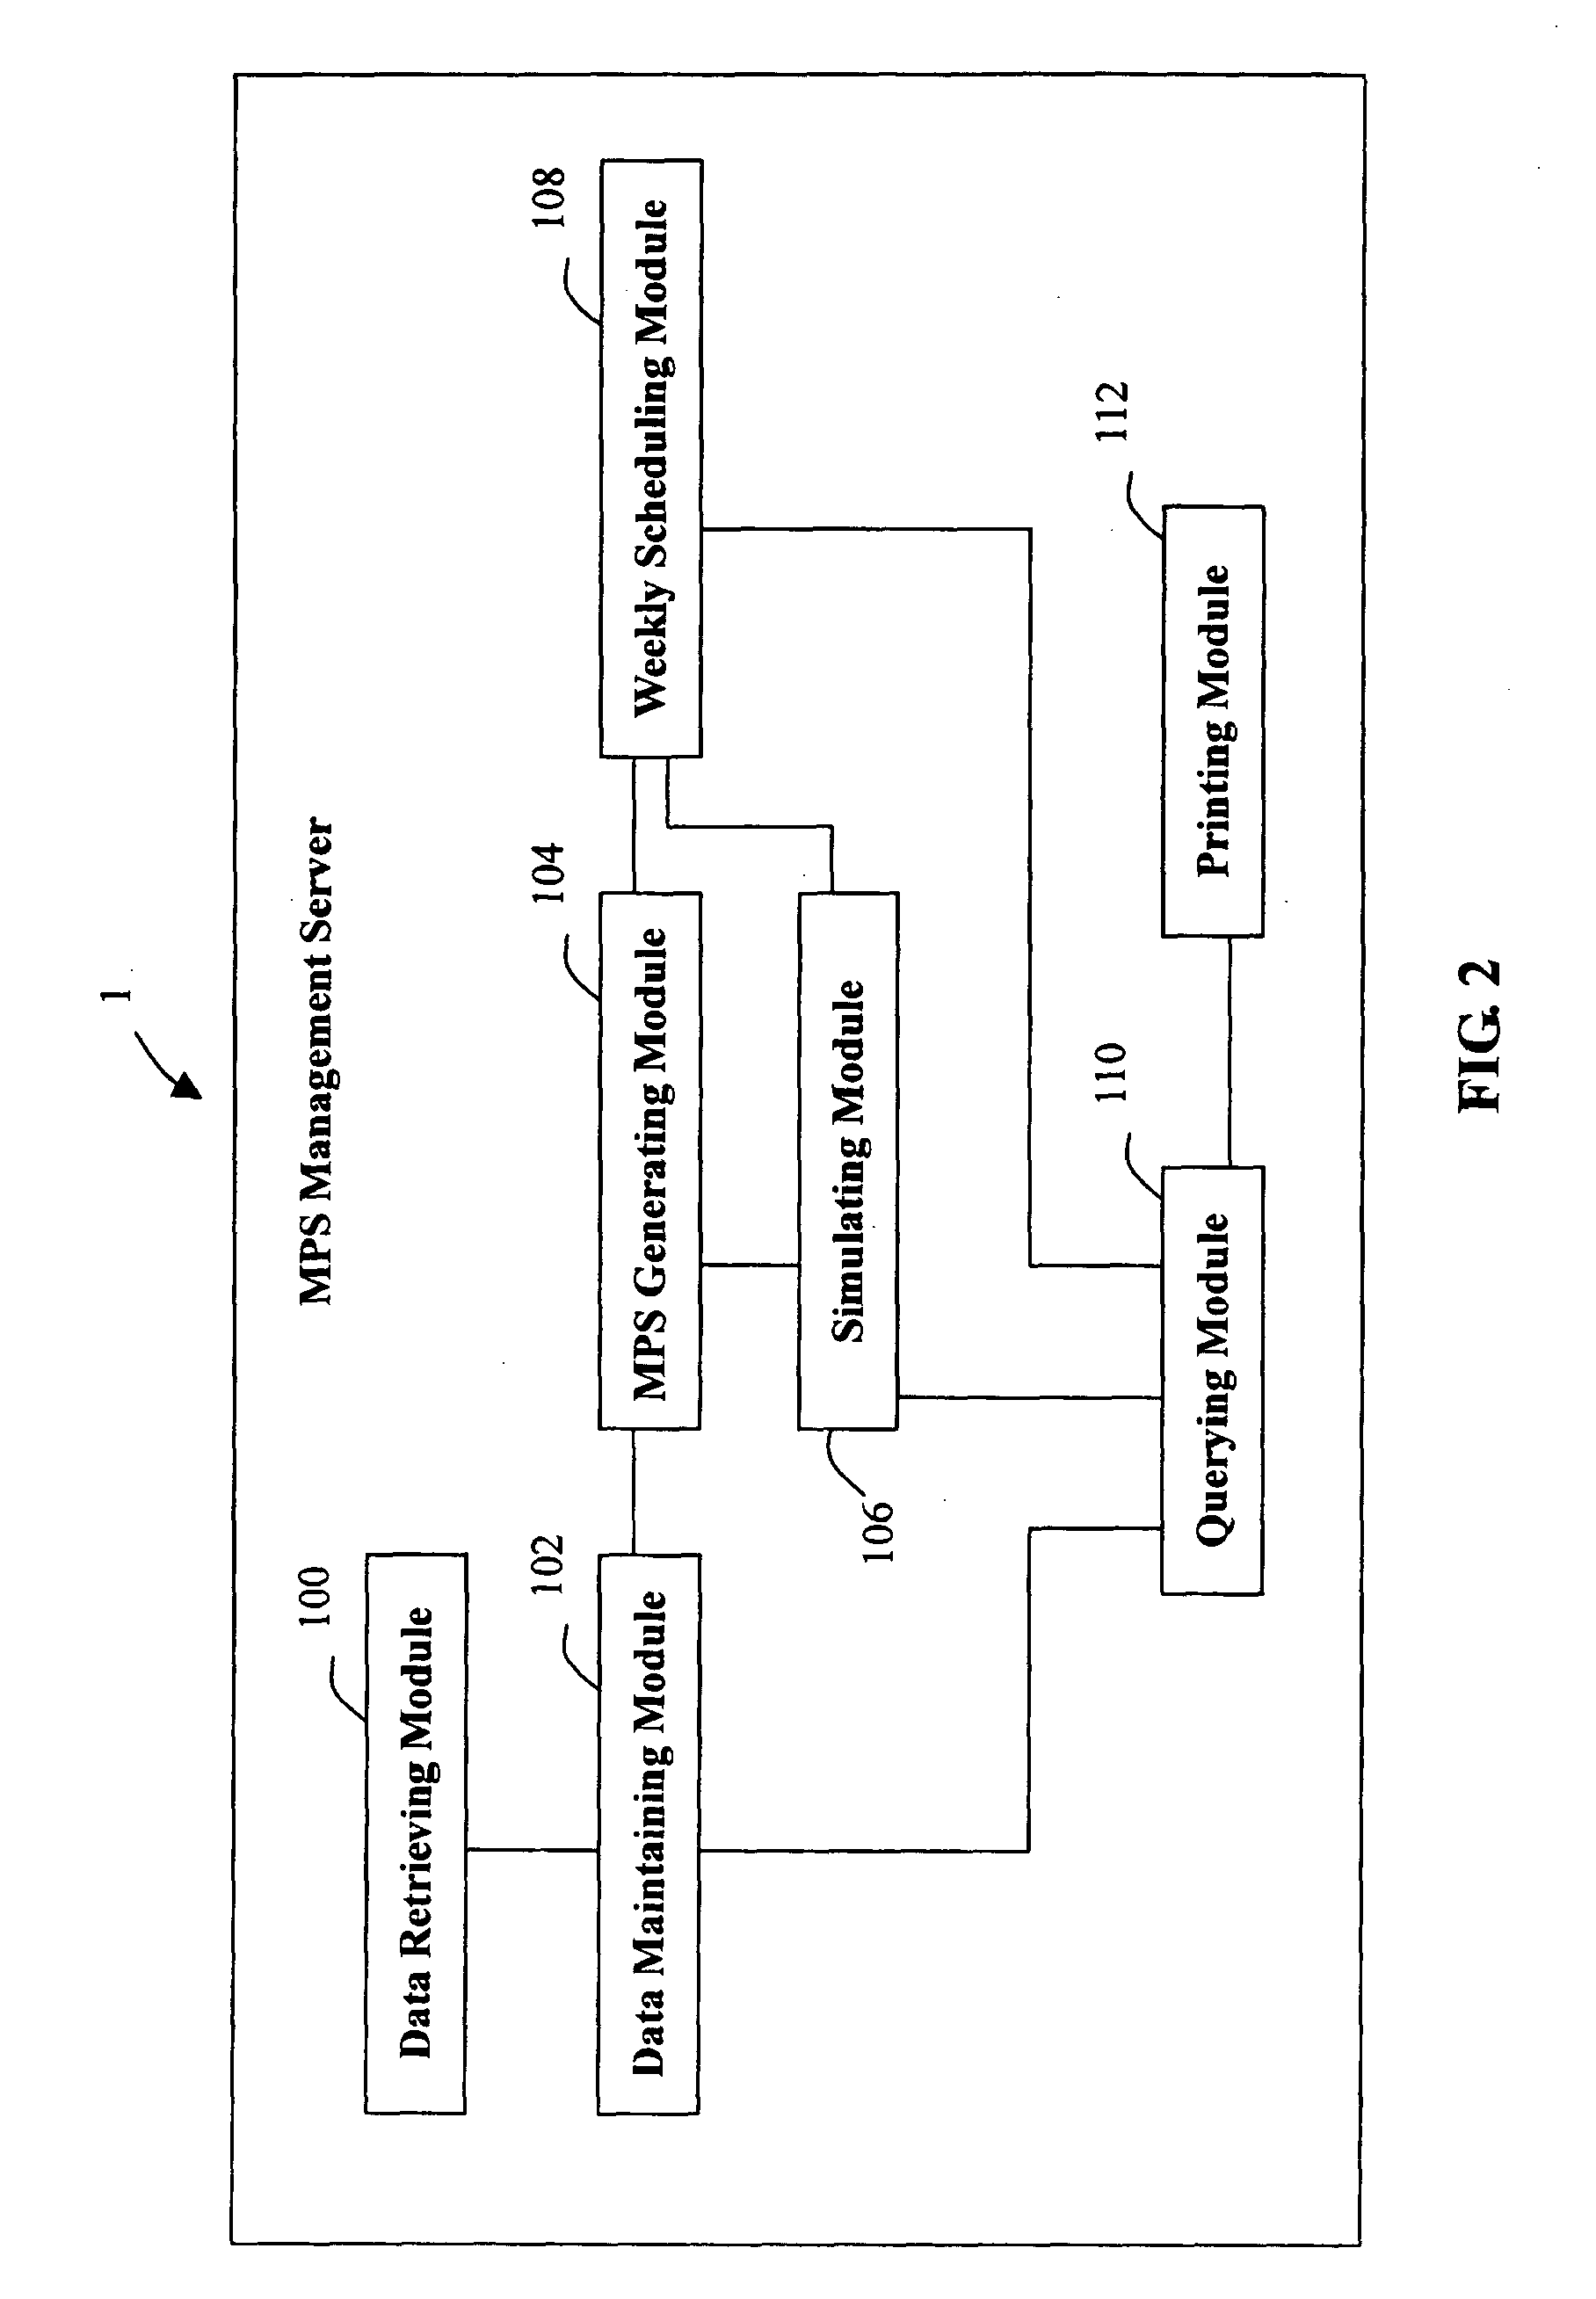 Production capability simulating system and method